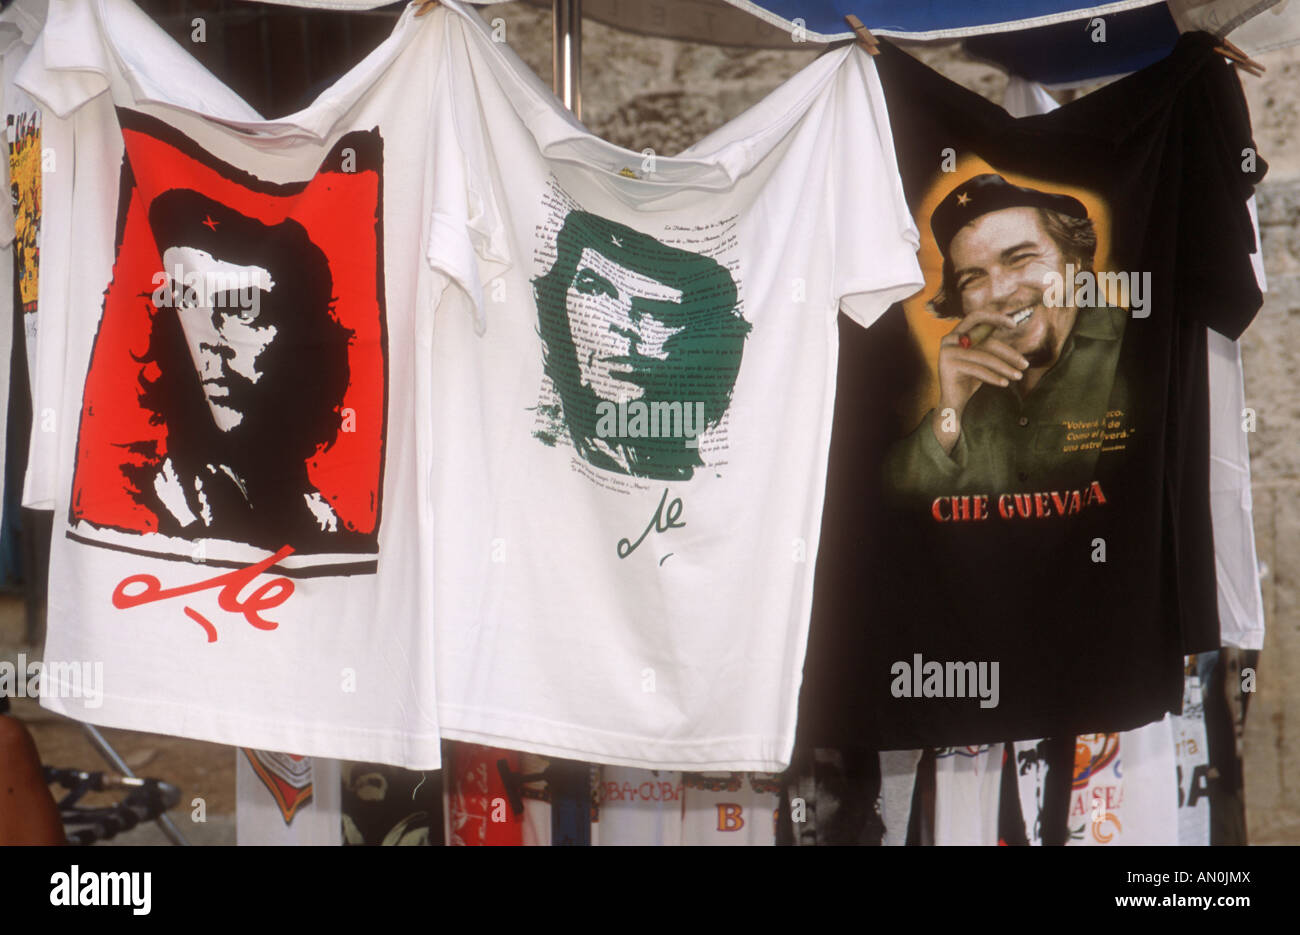 Printed t-shirts showing image of Che Guevara hanging from market stall in Havana, Cuba. Stock Photo